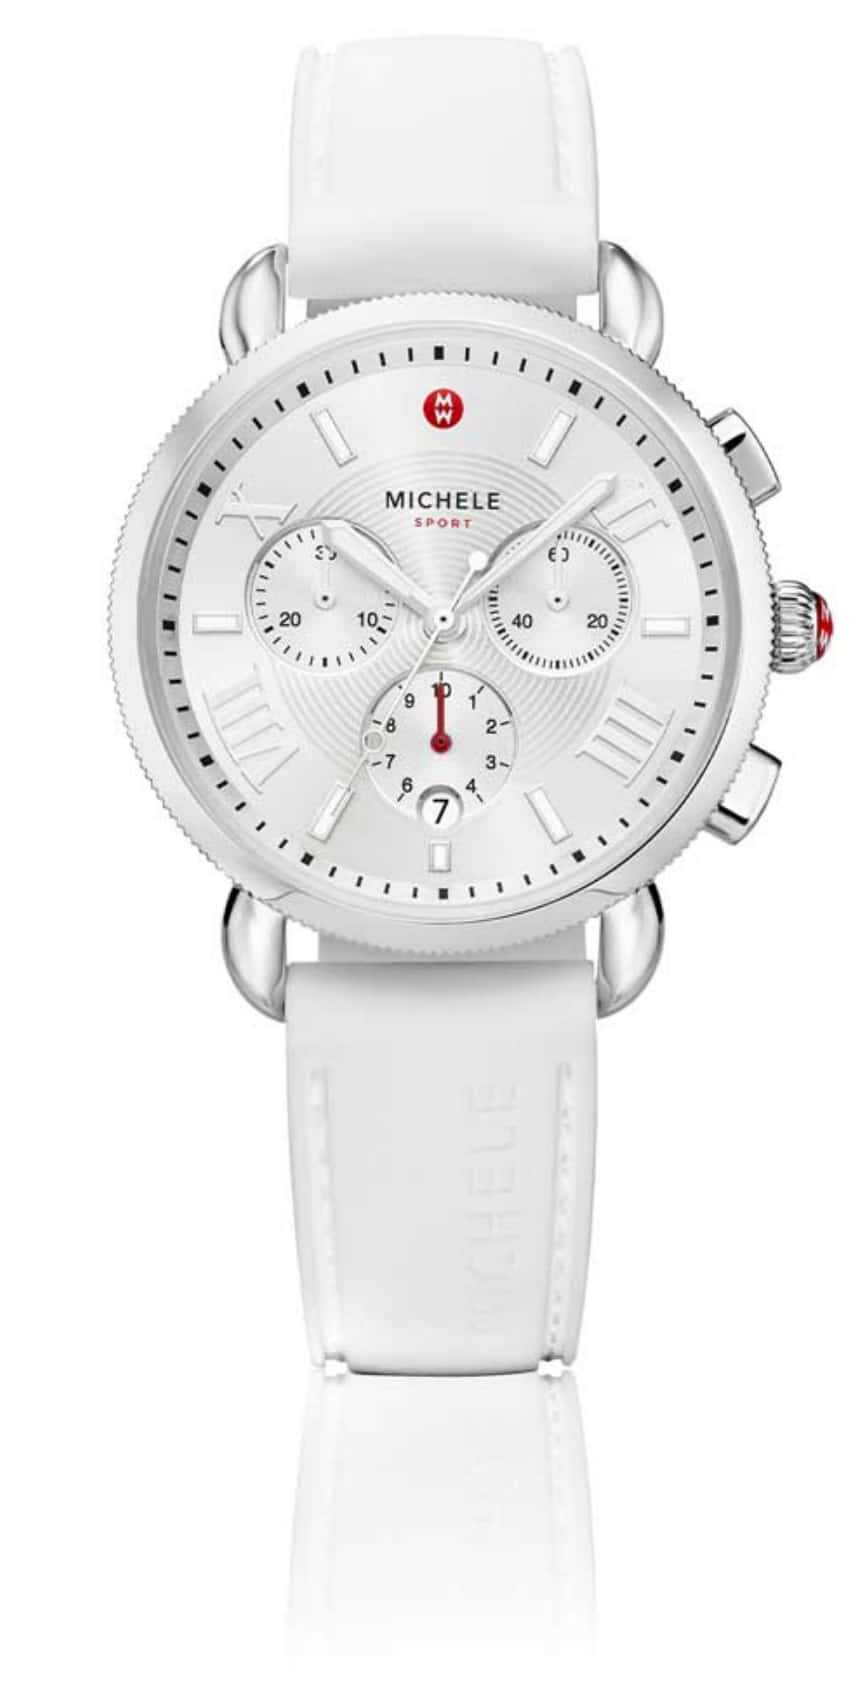 Sporty Sport Sail watch in white and stainless.